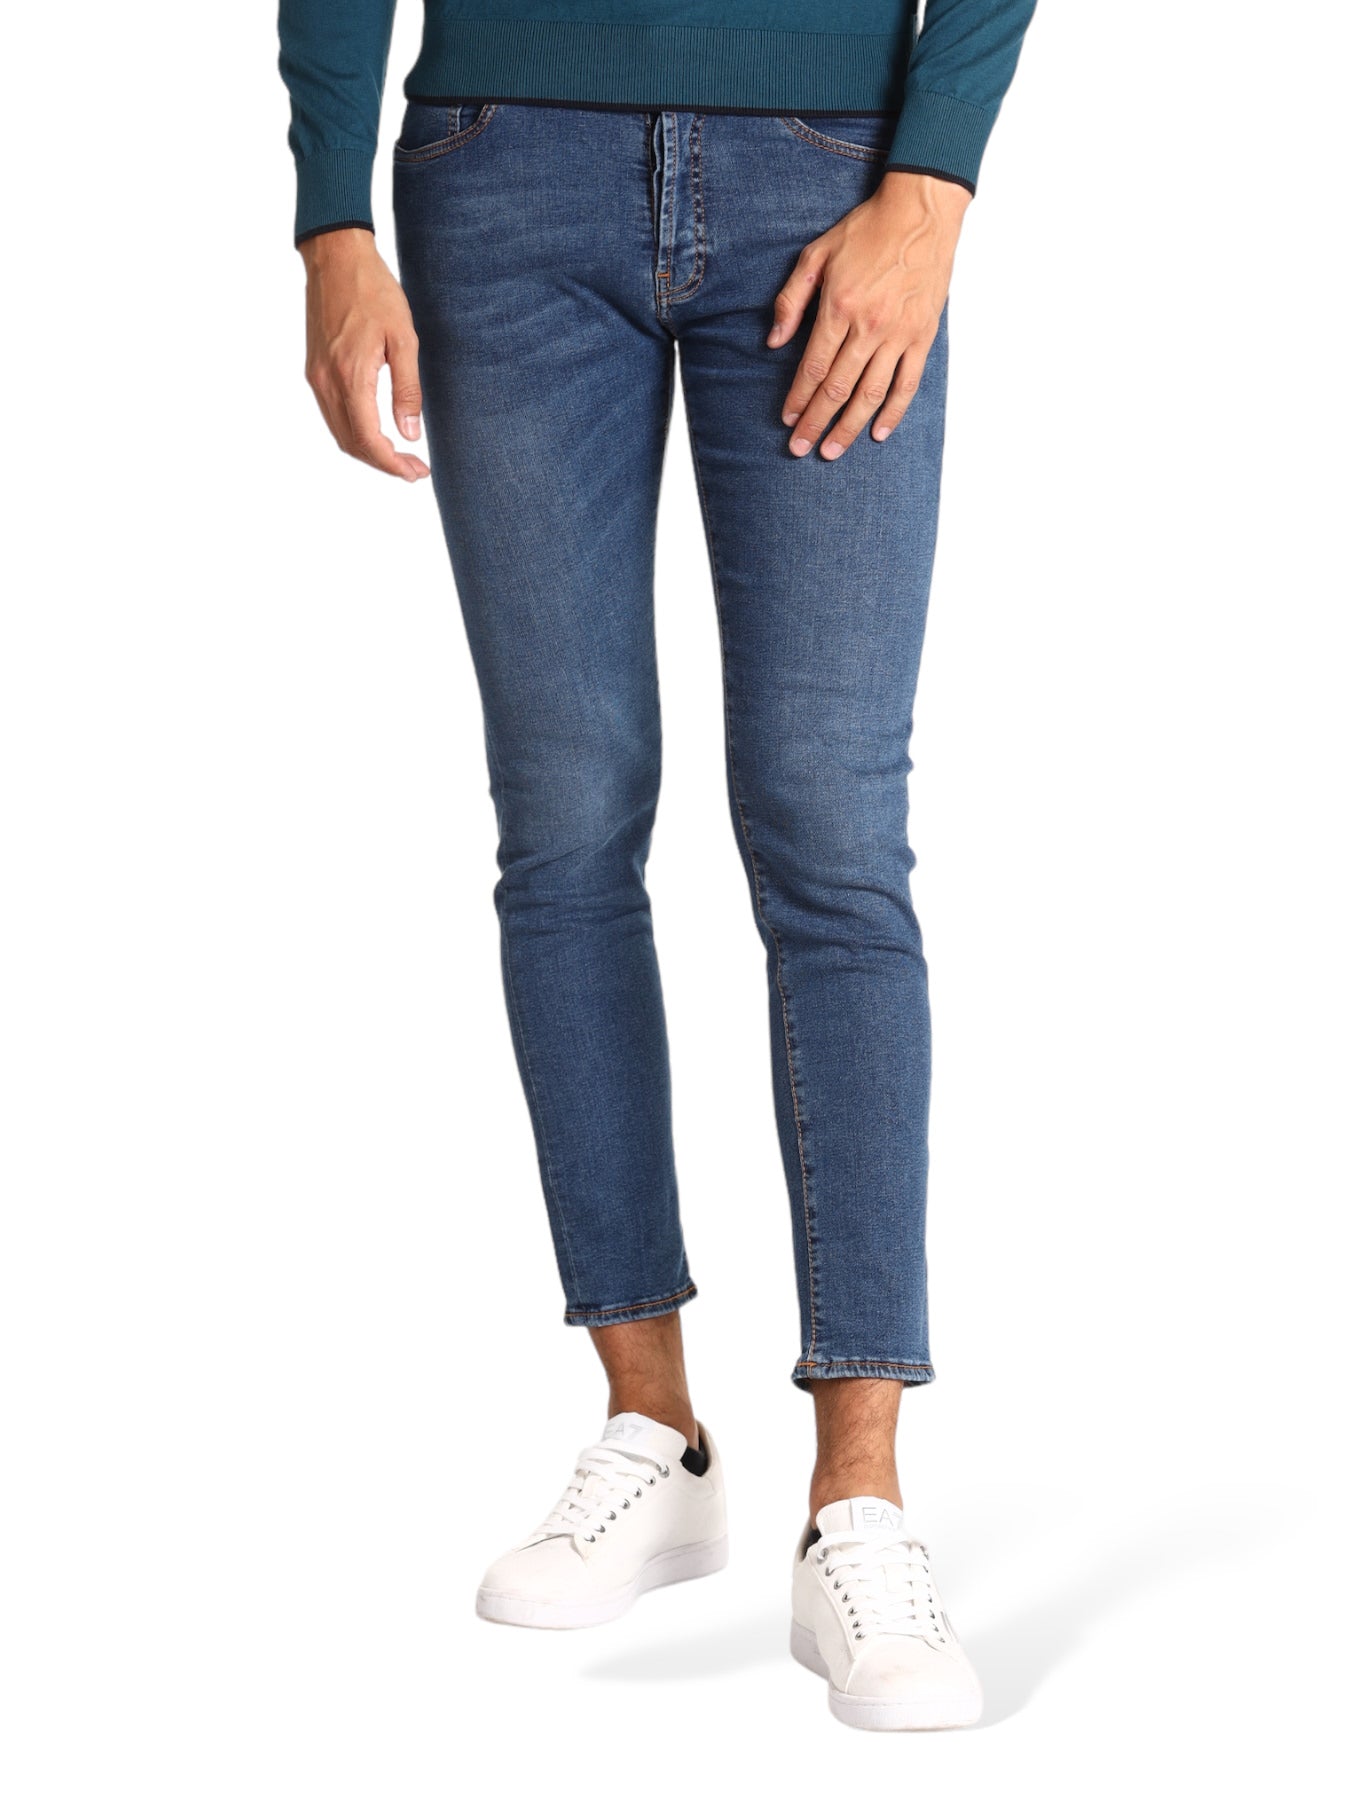 Men's Jeans - Exclusive Collection with Top Brands | Online Sale